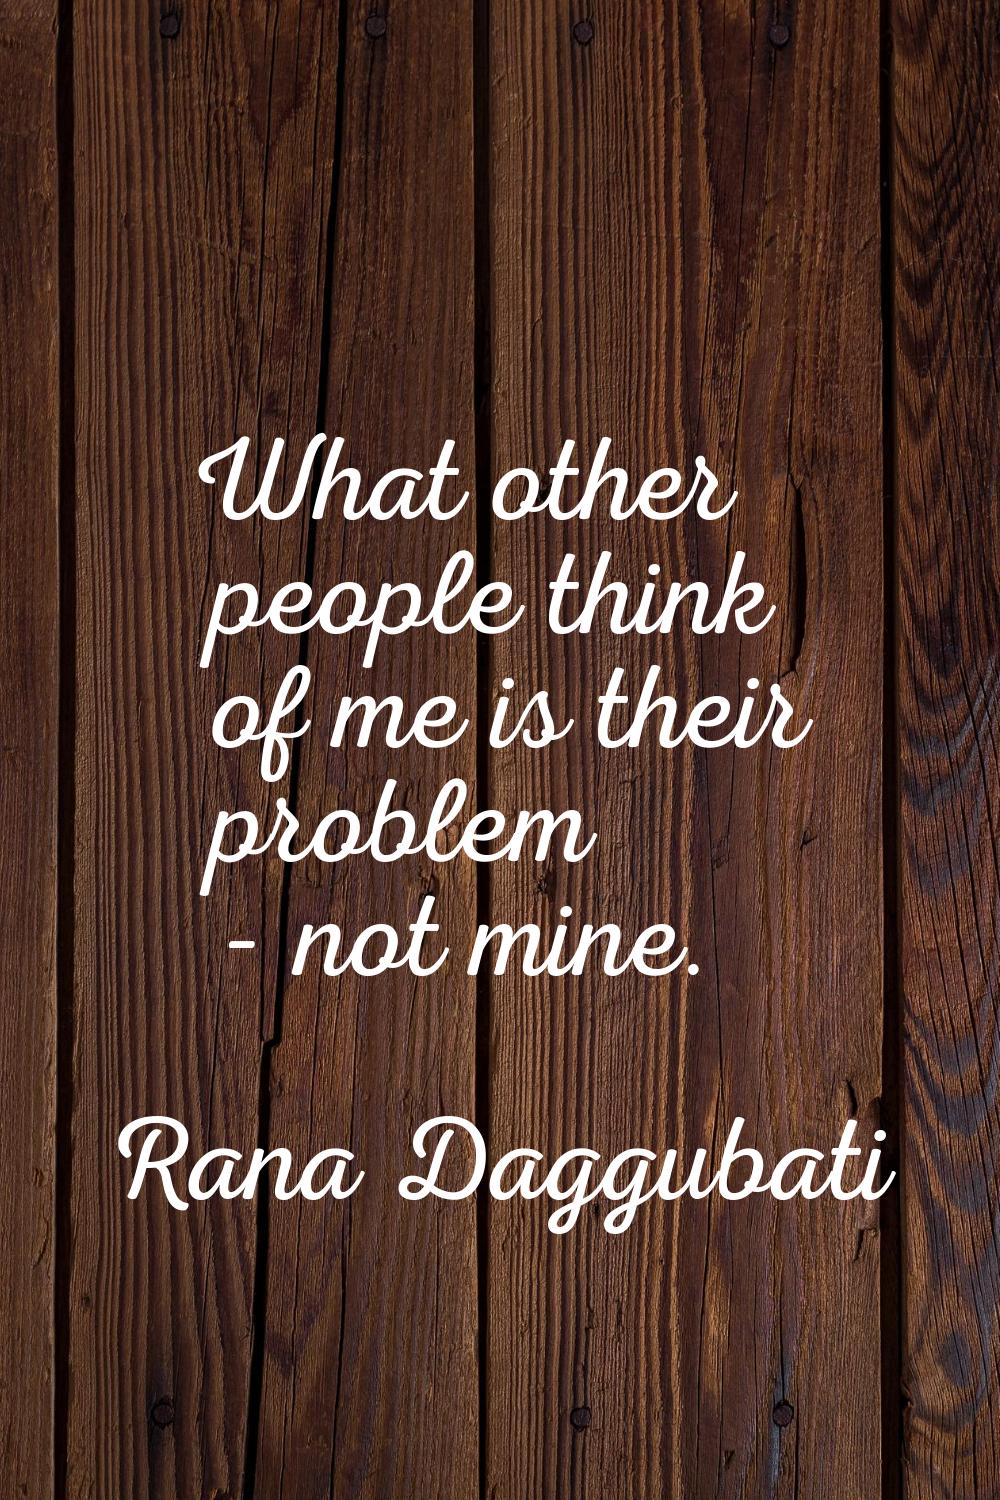 What other people think of me is their problem - not mine.